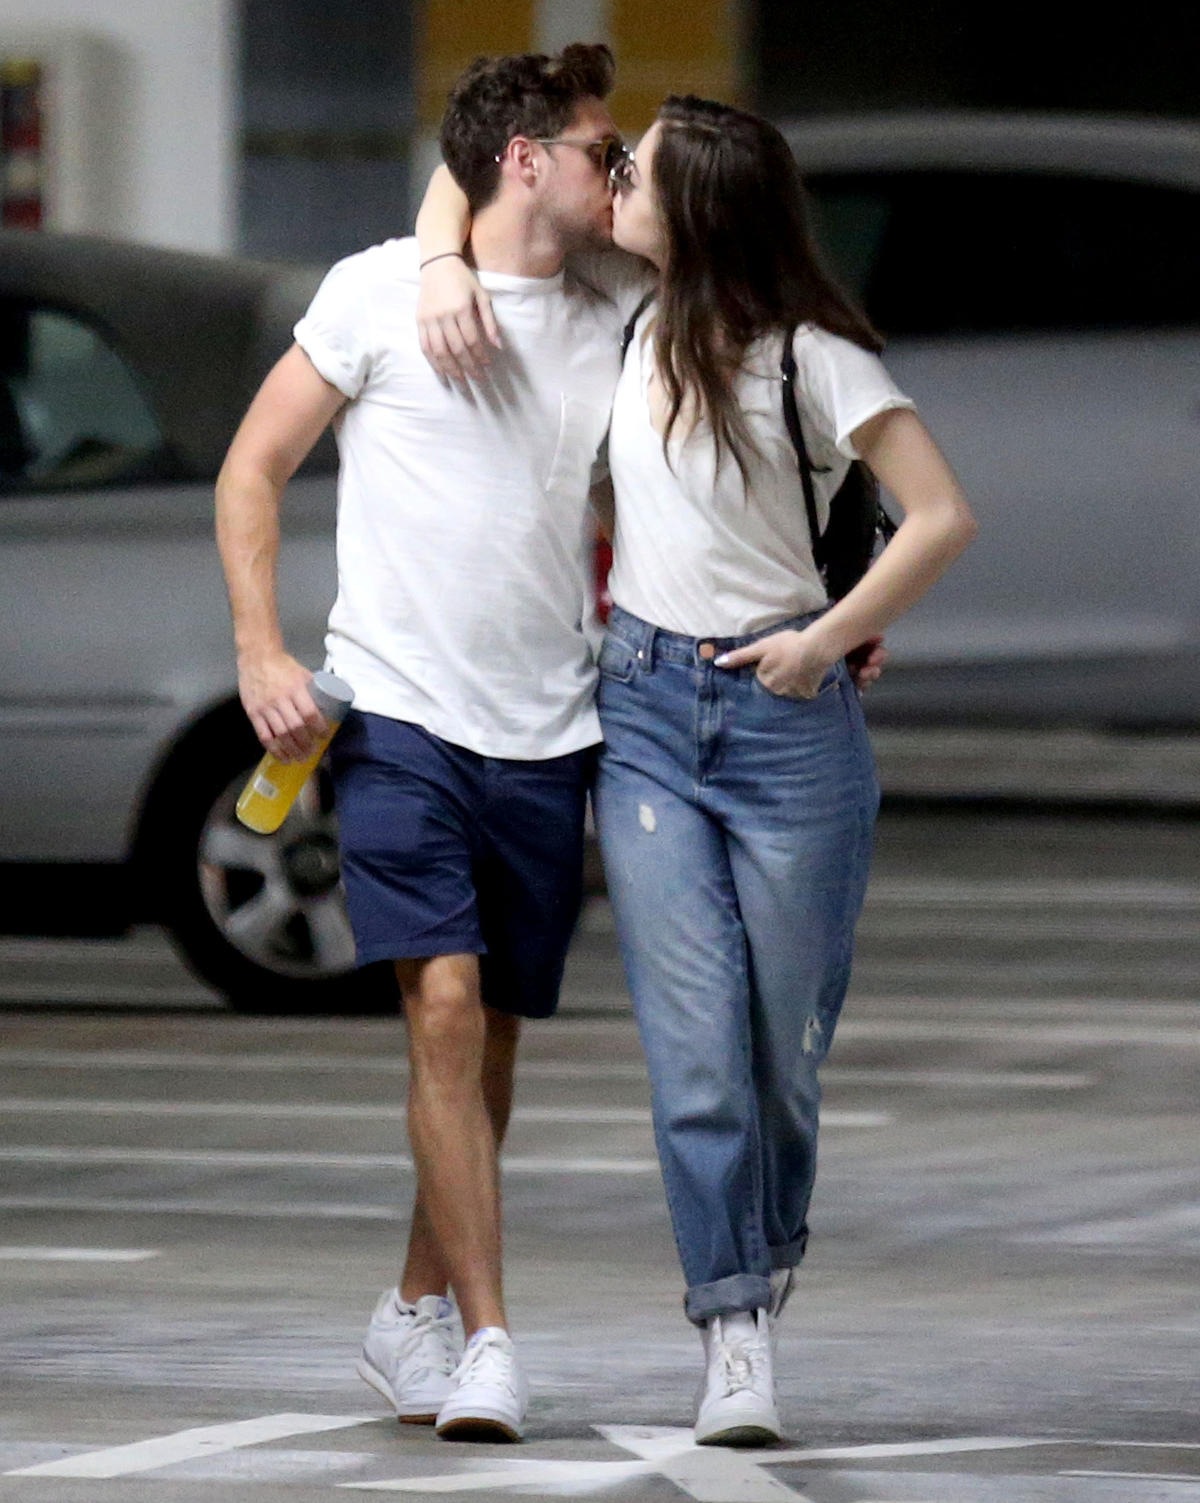 Niall Horan And Hailee Steinfeld Share A Kiss As They Take Their Romance Public For First Time